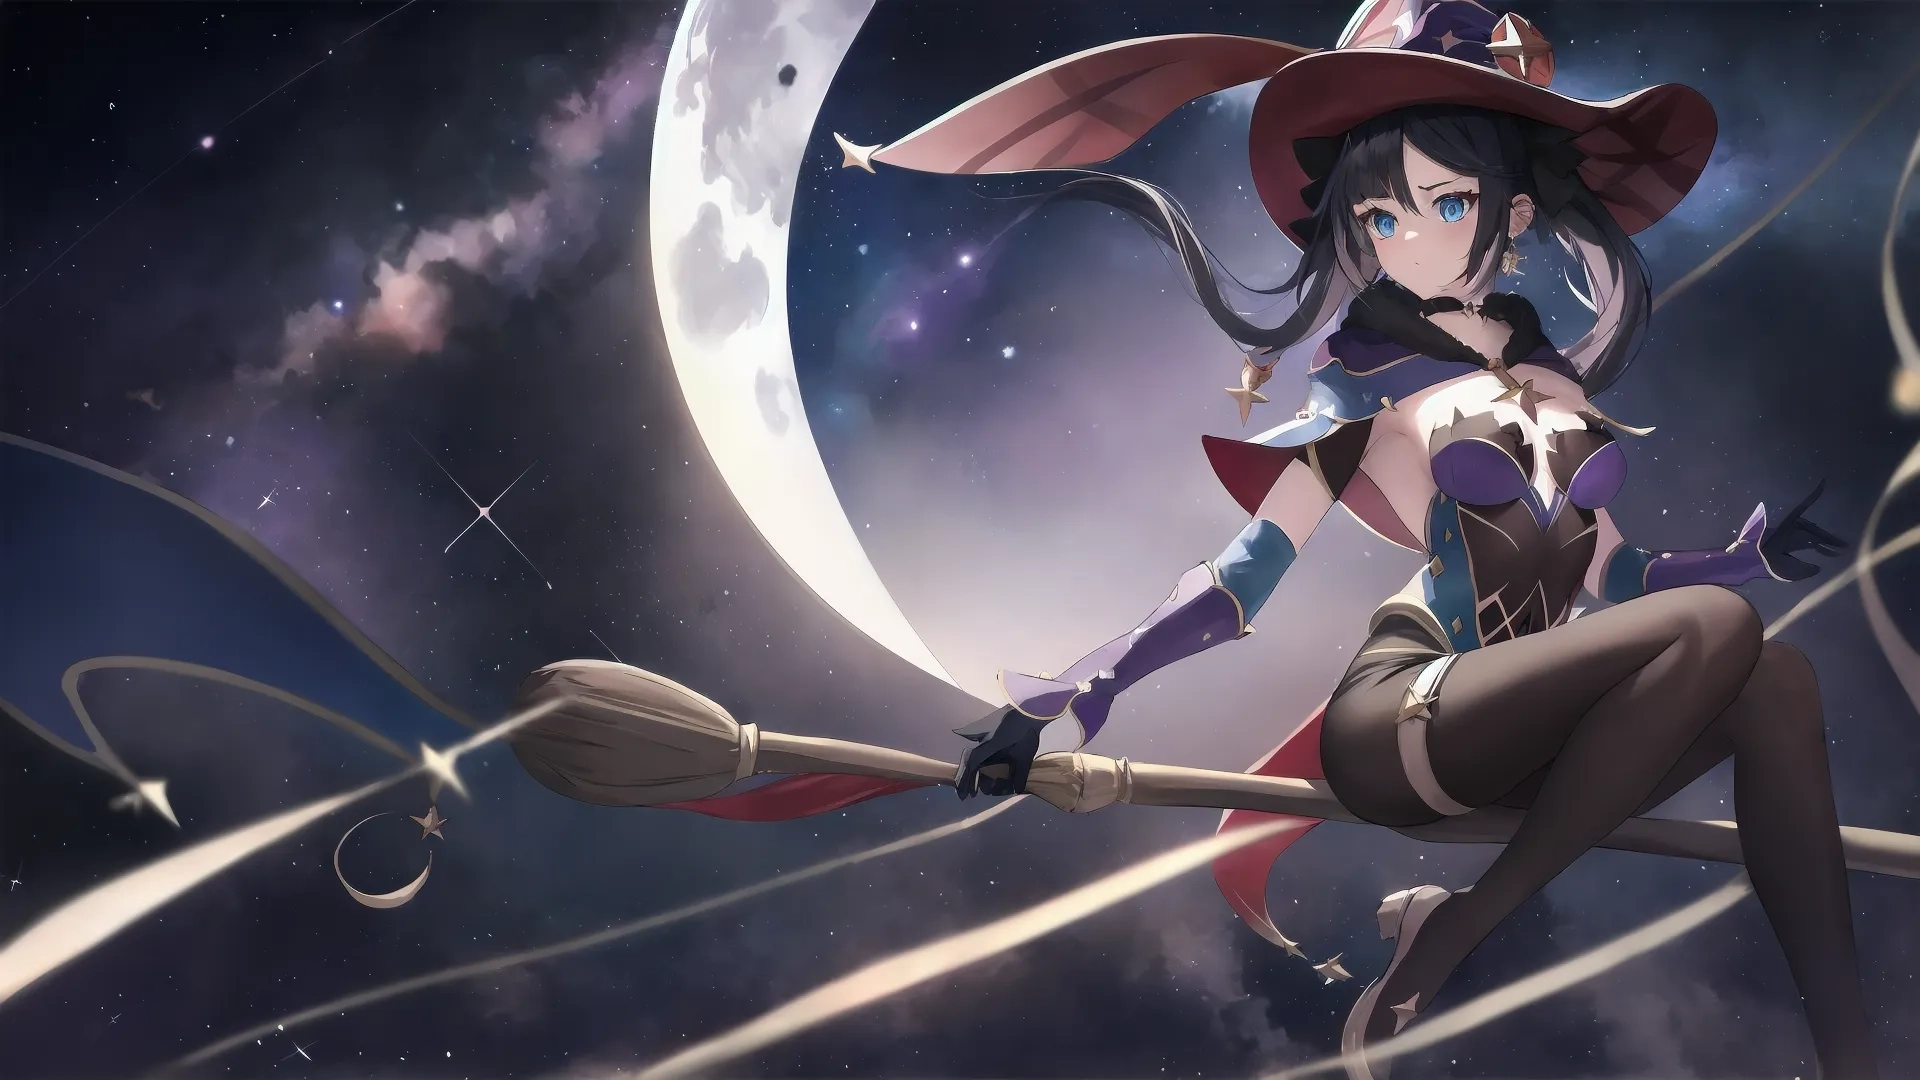 long hair, witches, blood soaked woman sitting on broom with moon and stars in background in front of backdrop of the sky with the moon
